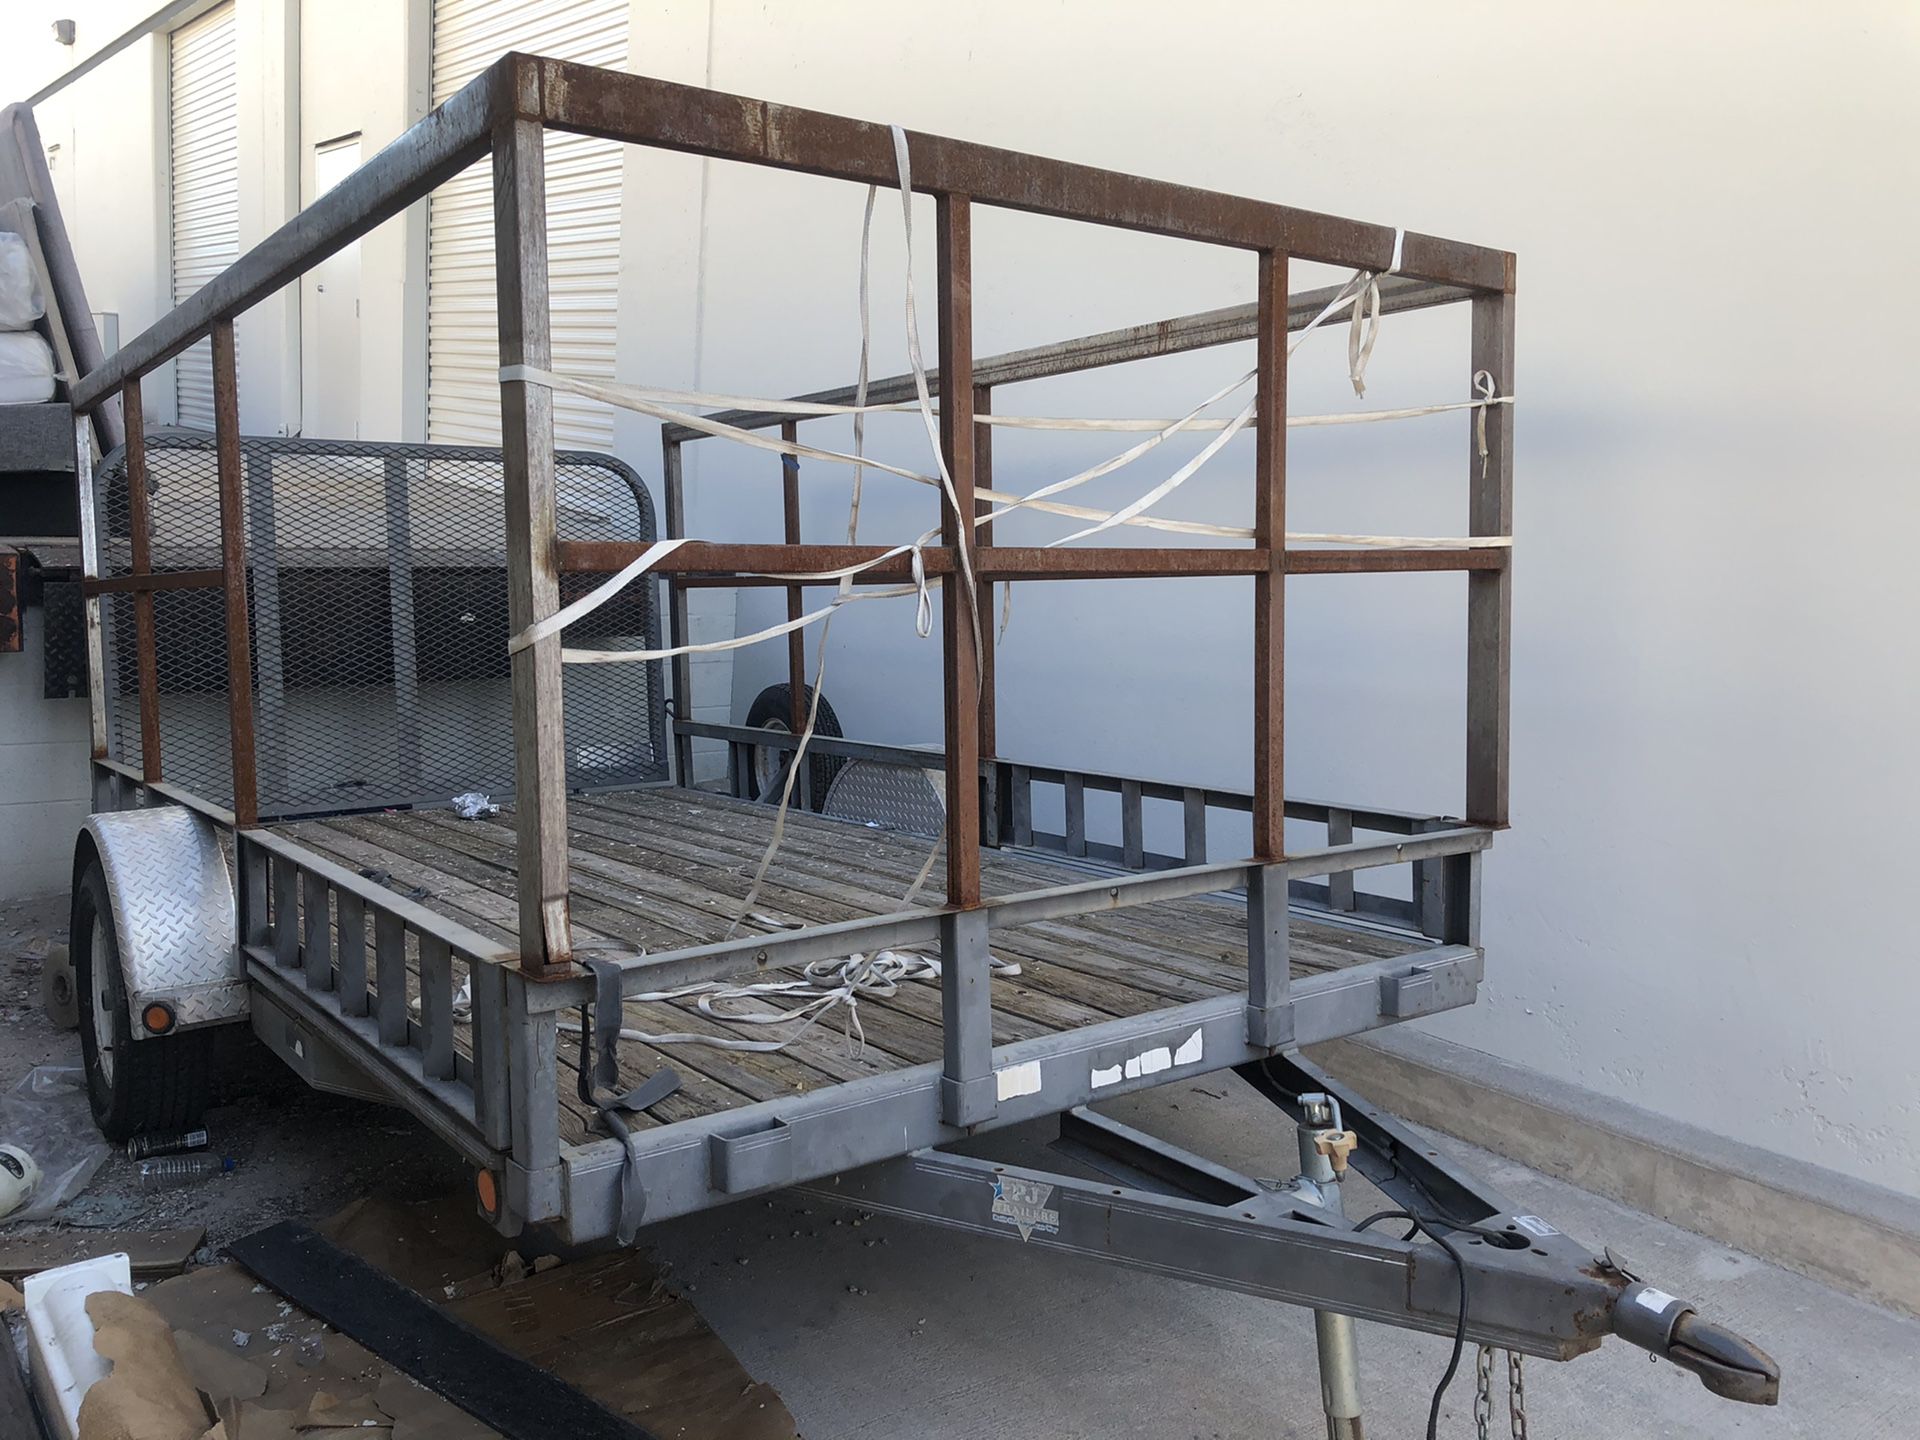 Dual ATV Trailer ,super strong PJ manufactured trailer,These are very high quality trailer